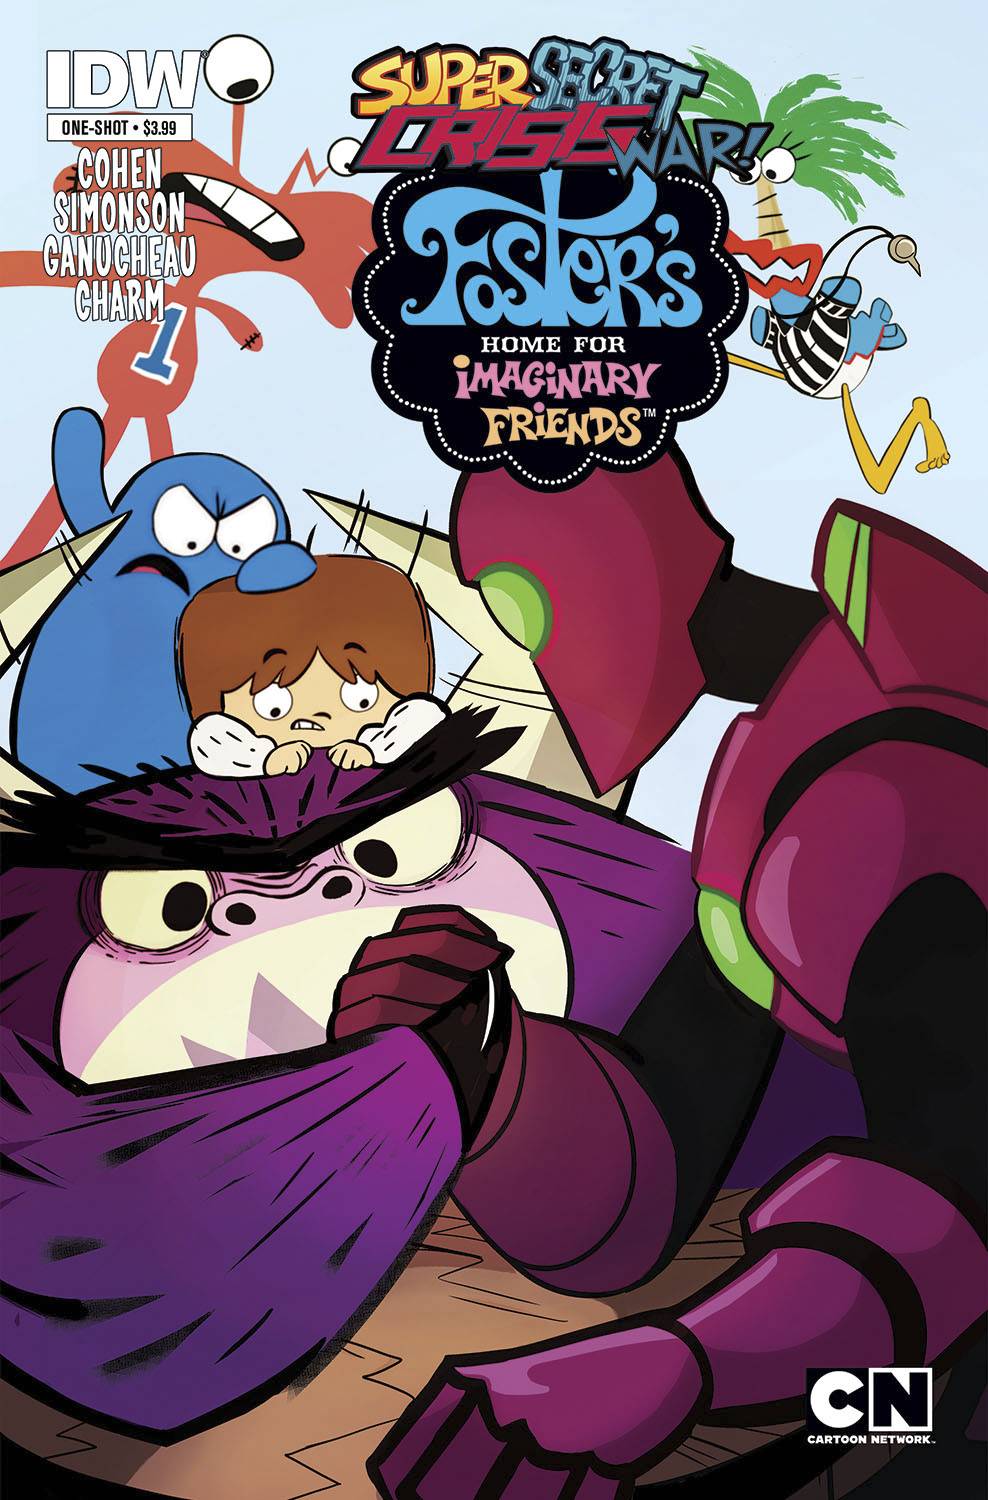 Sscw Fosters Home for Imaginary Friends #1